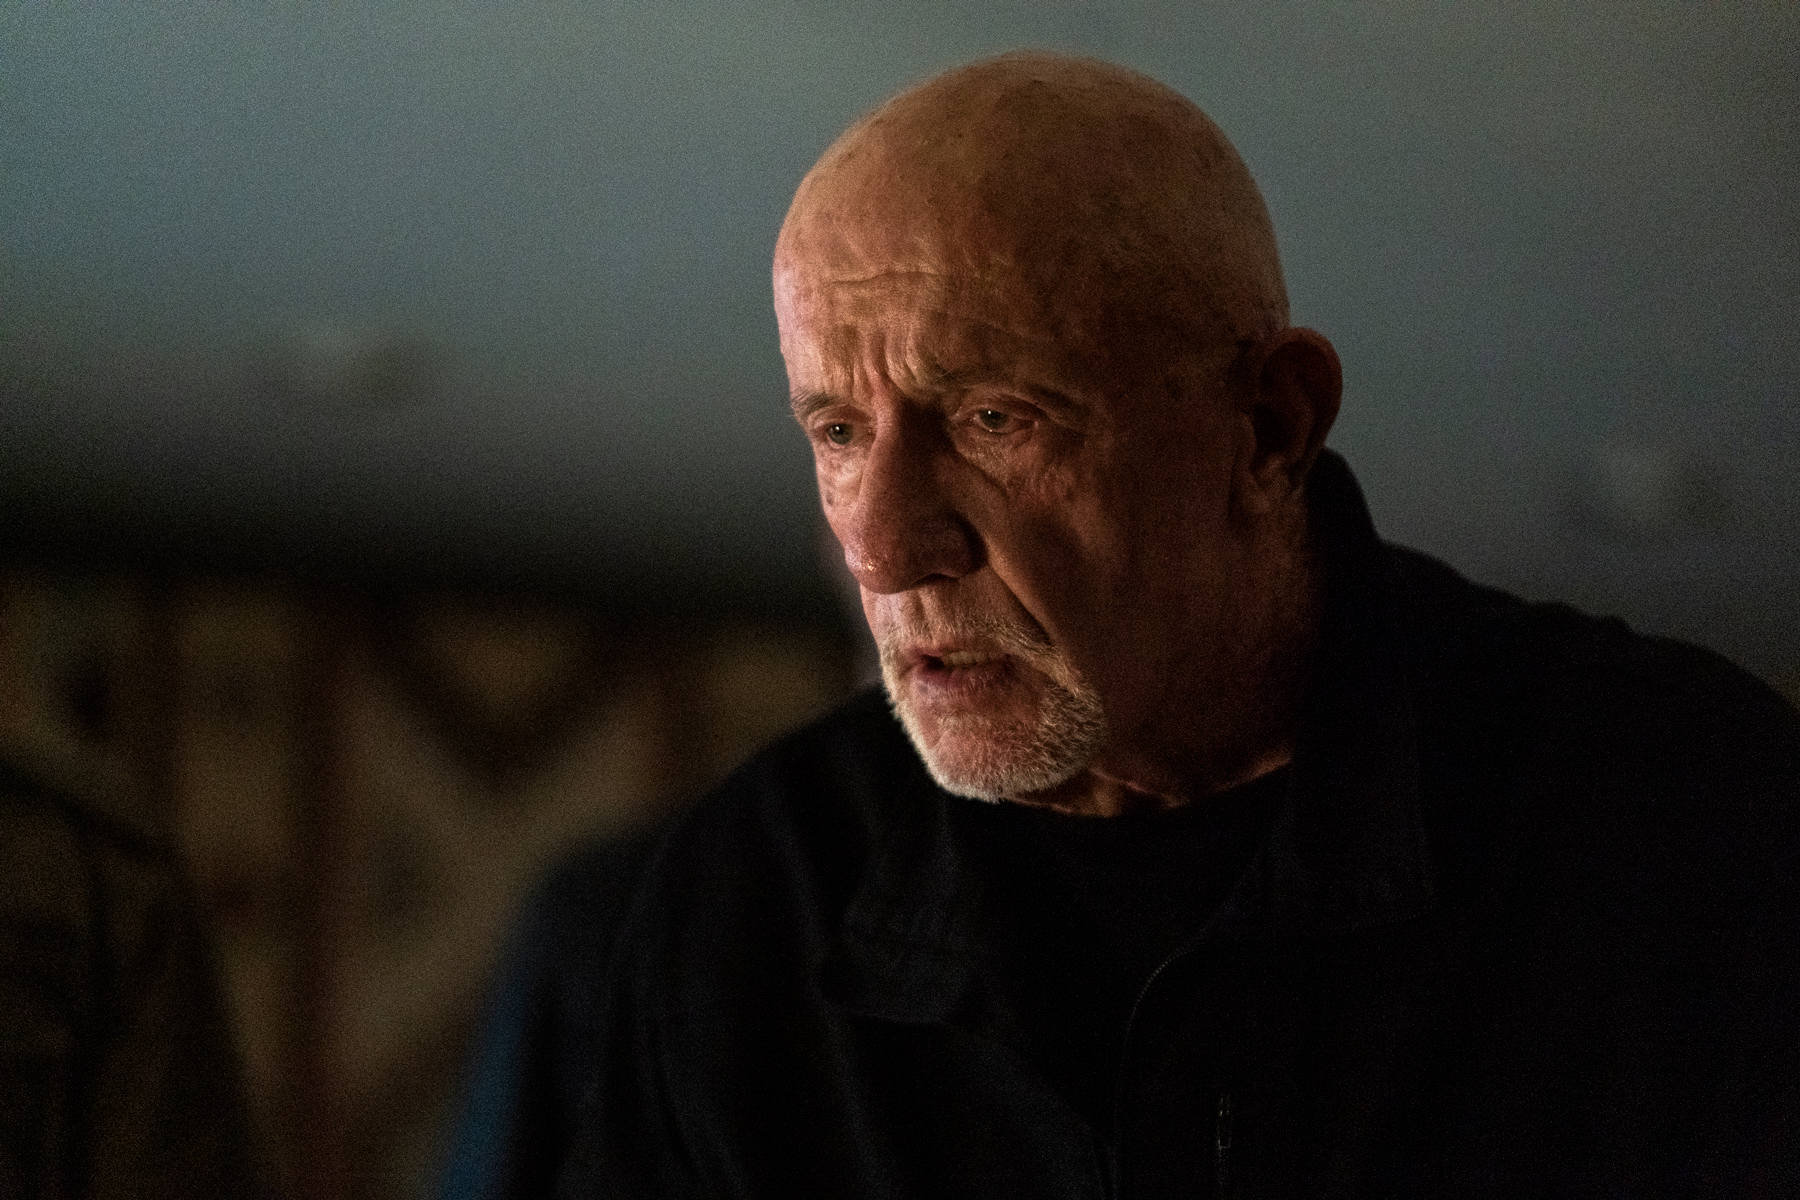 Jonathan Banks as Mike Ehrmantraut - Better Call Saul _ Season 6, Episode 8 - Photo  Image Credits: Greg Lewis/AMC/Sony Pictures Television